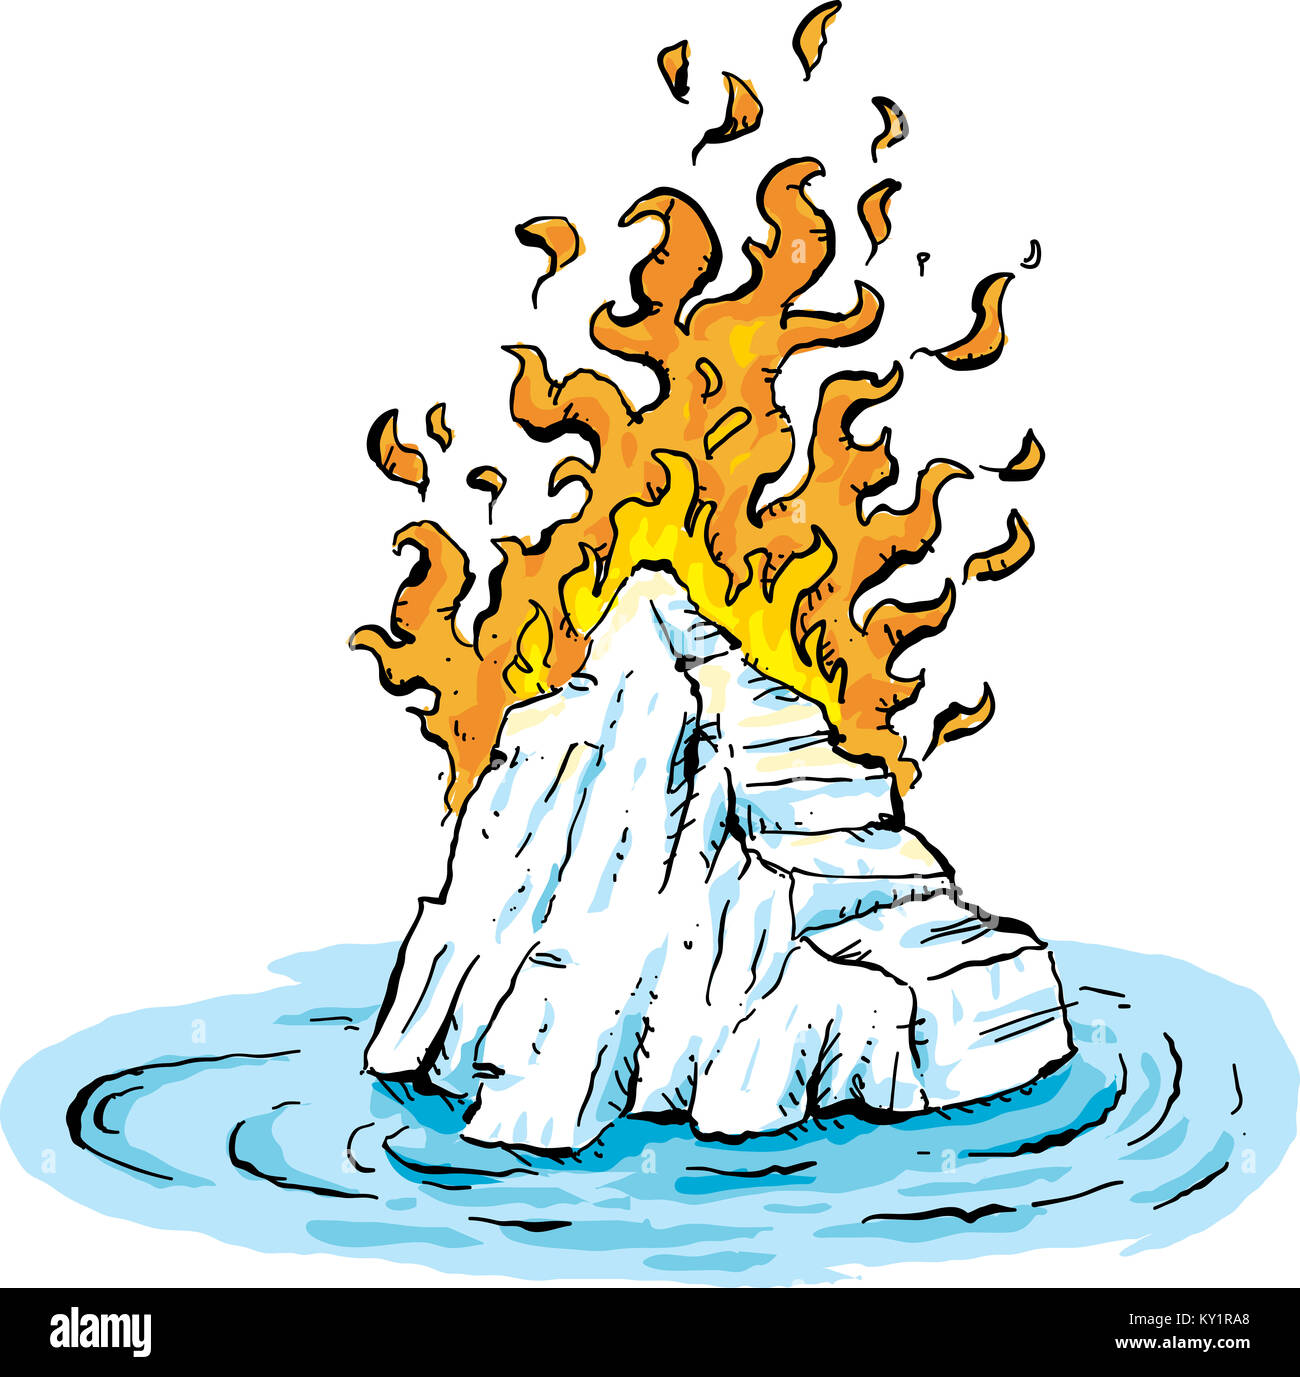 Cartoon of searing flames burning on a frozen, cold iceberg floating in water. Stock Photo